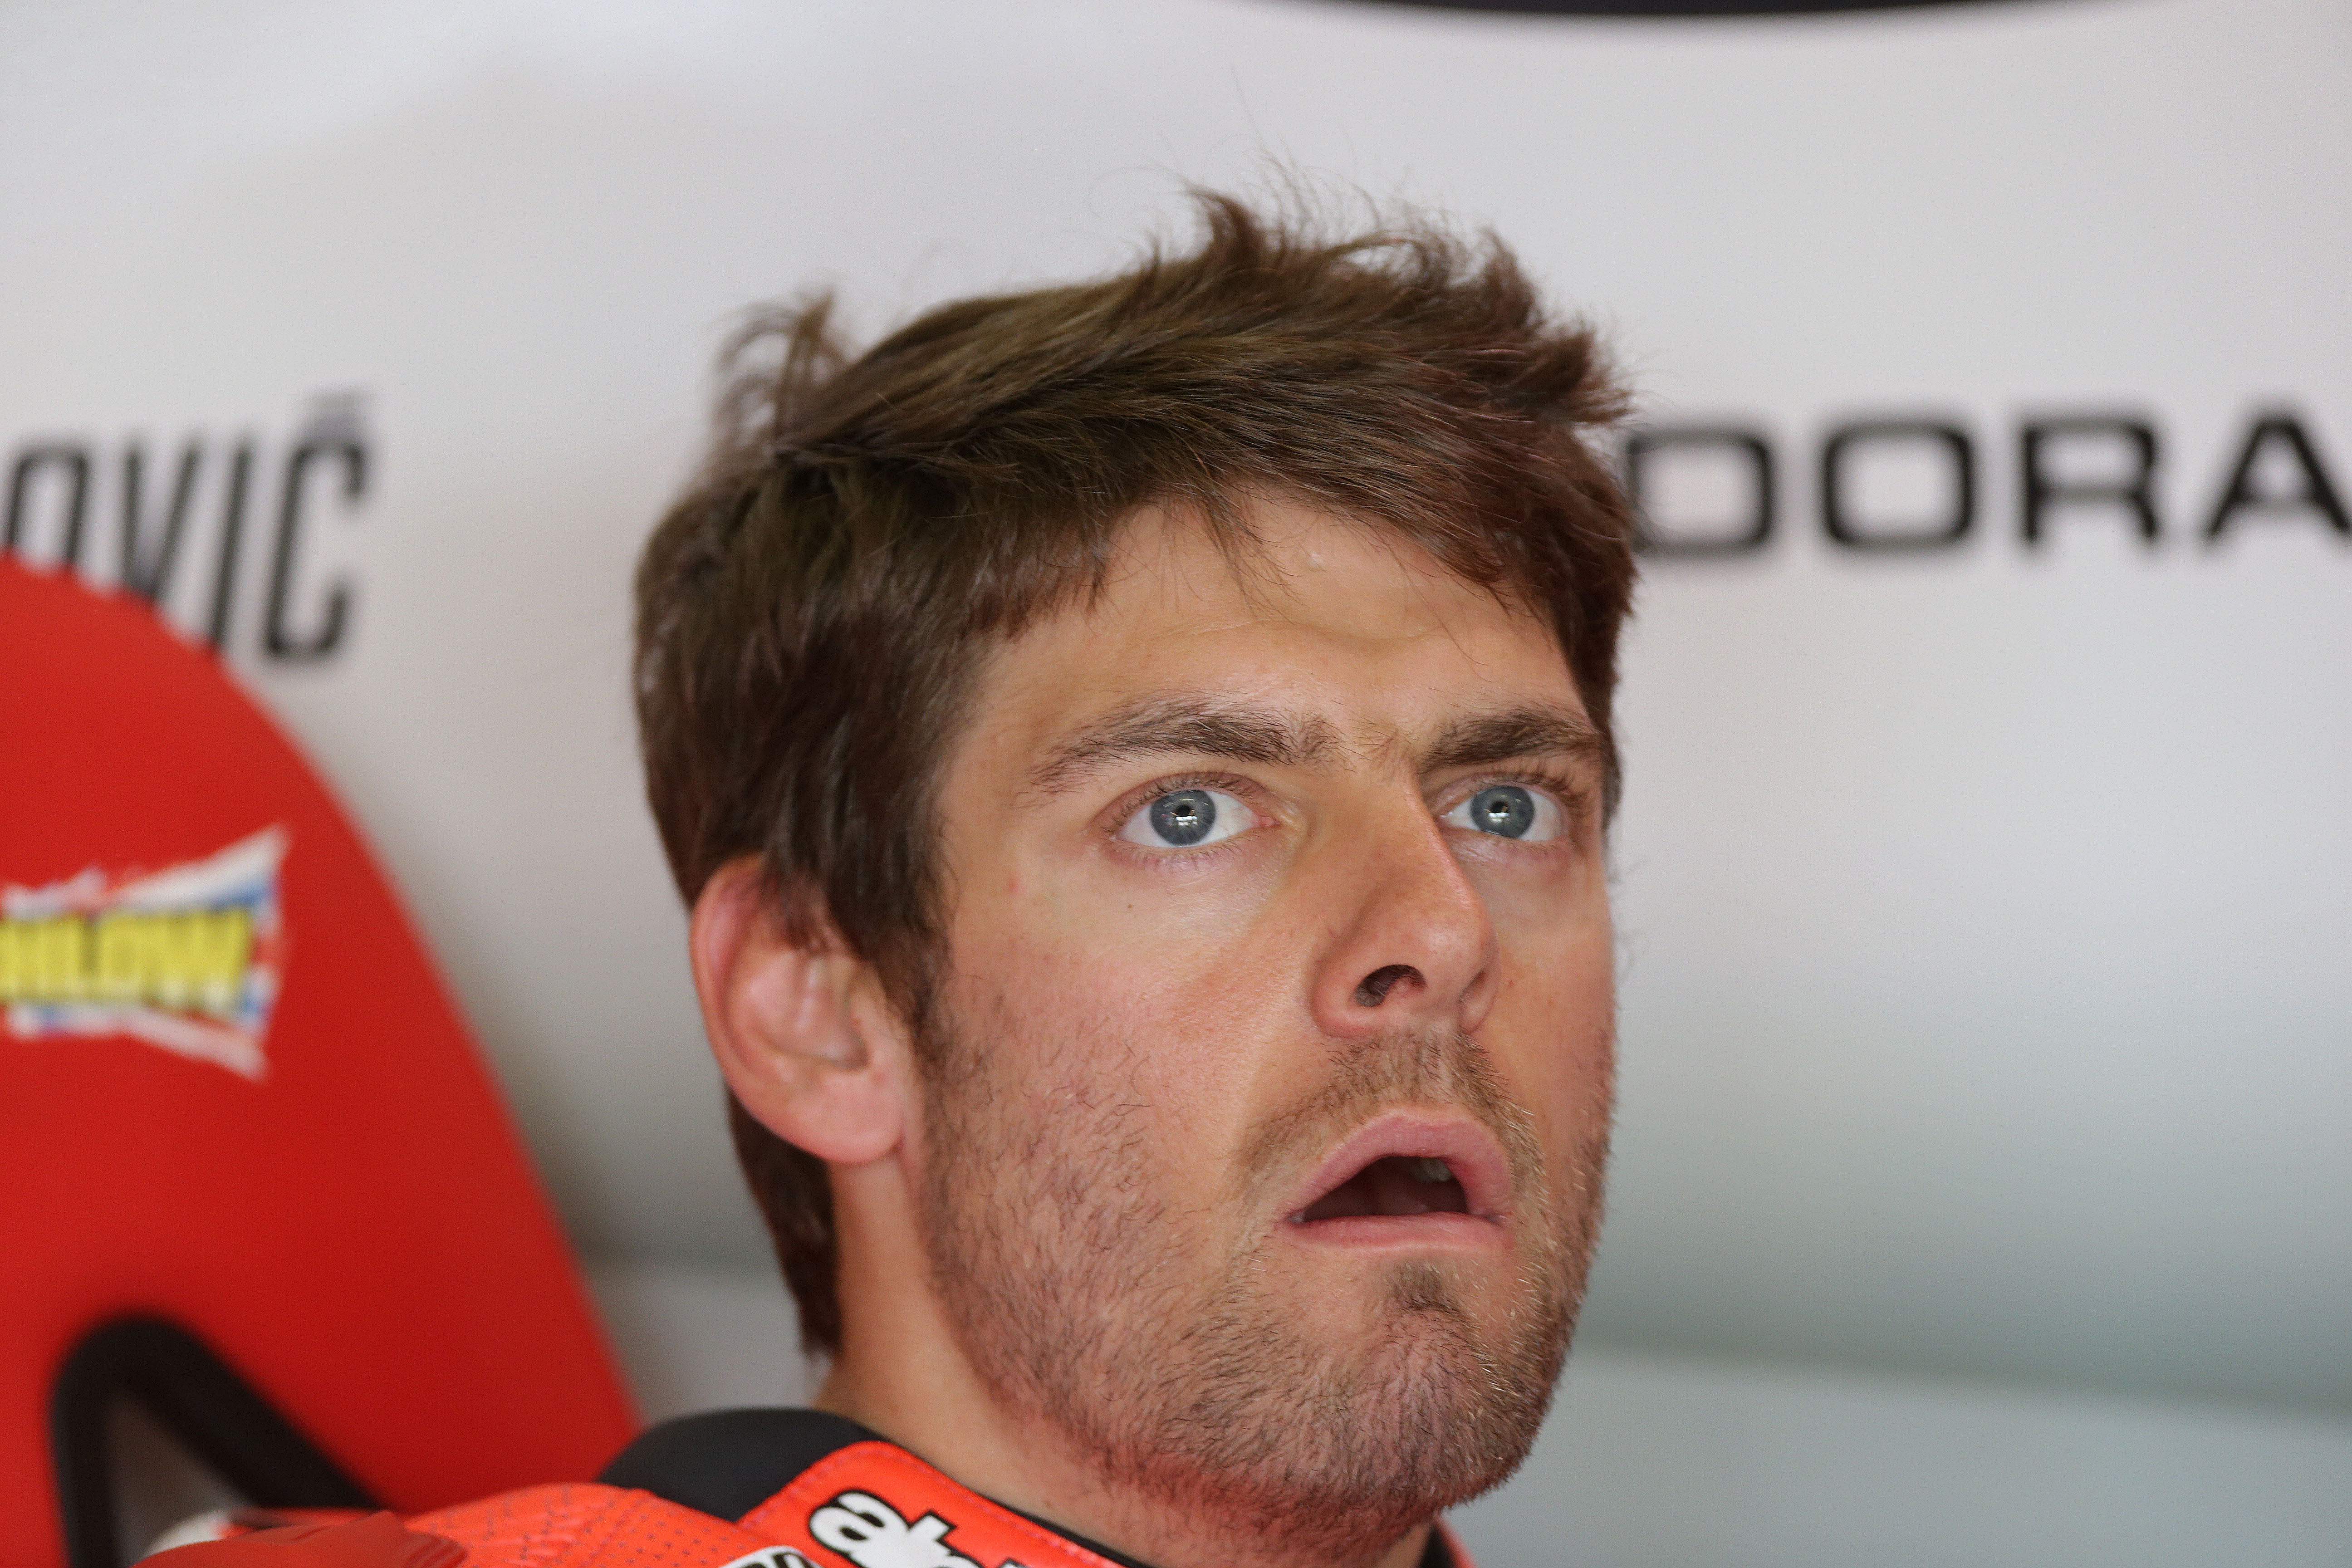 Crutchlow to leave Ducati at the end of 2014